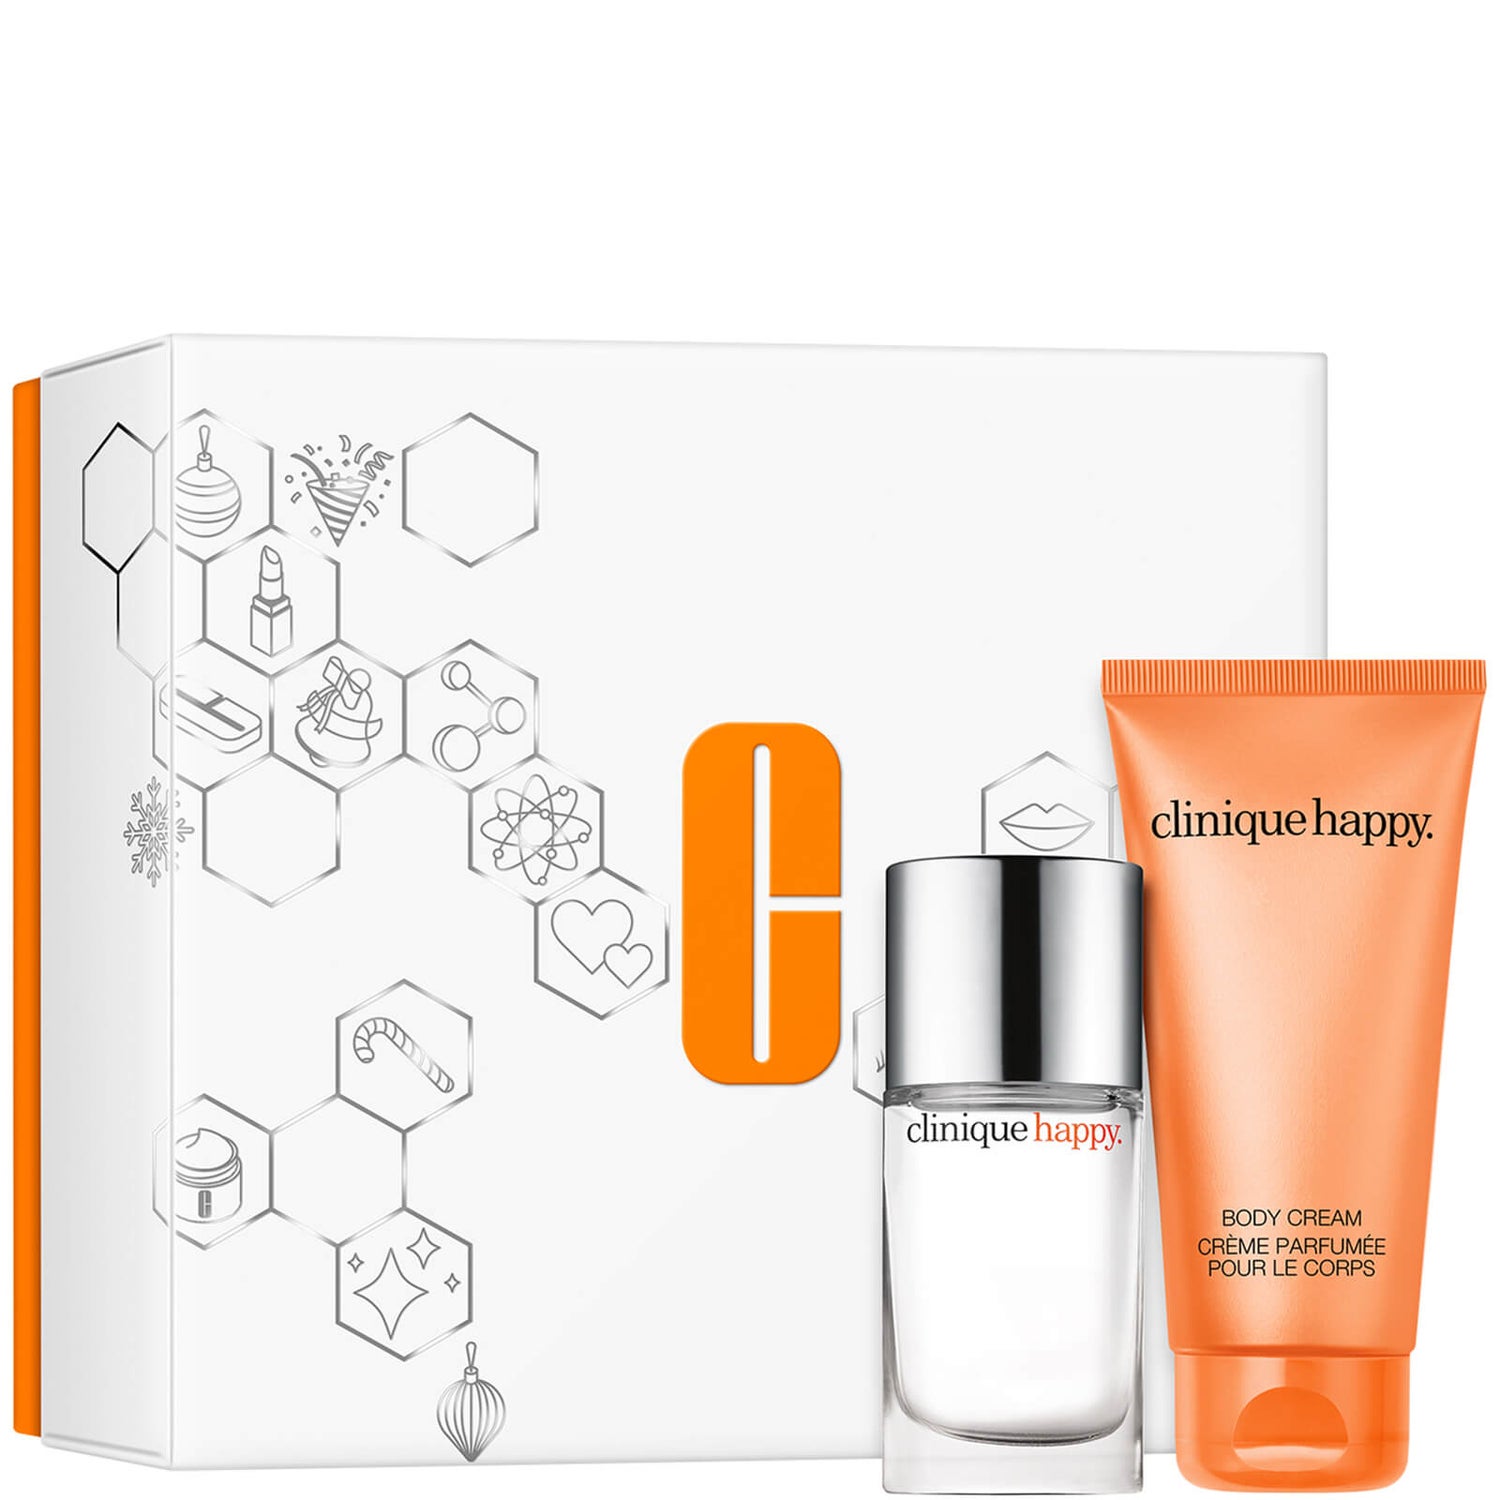 Clinique Have a Little Happy Fragrance Gift Set (Worth £41.78)